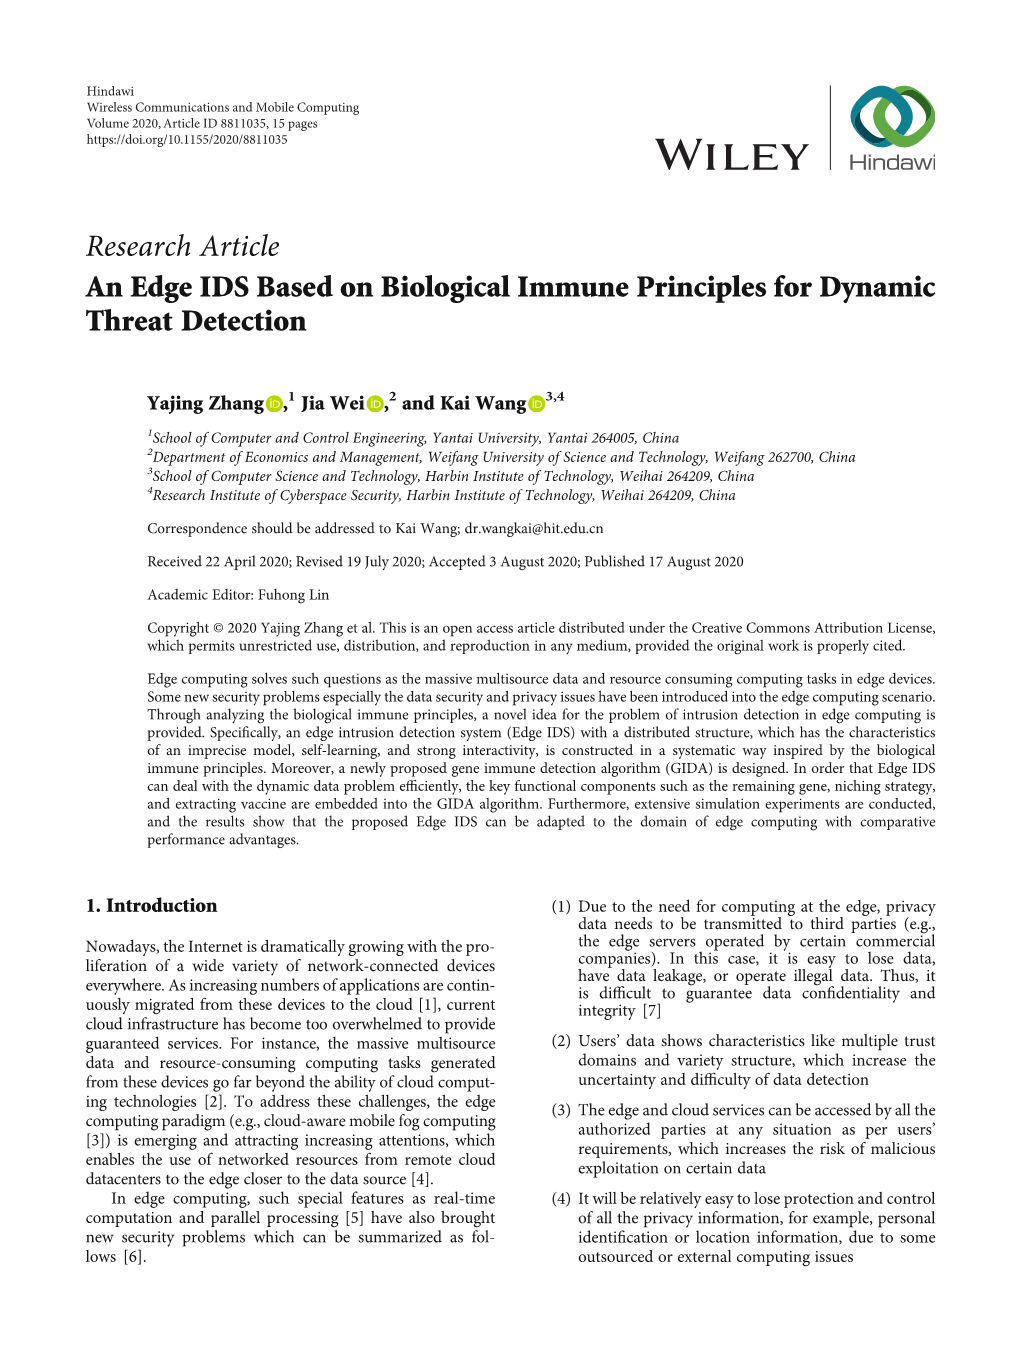 An Edge IDS Based on Biological Immune Principles for Dynamic Threat Detection